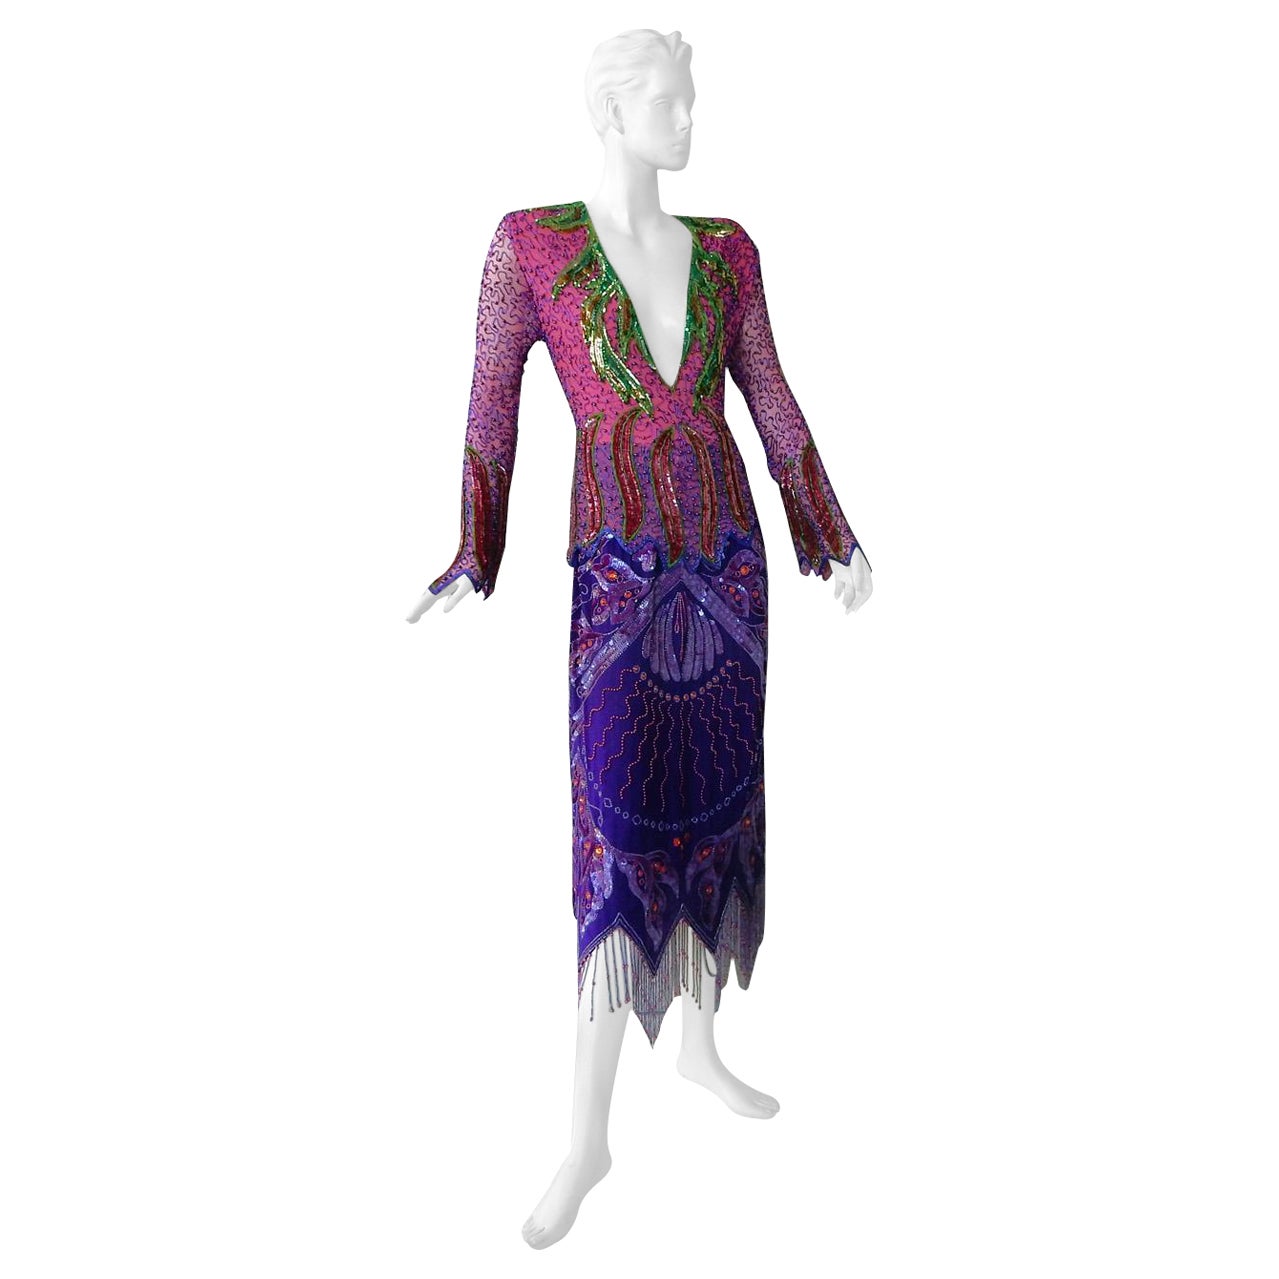 NWT Gucci $28K Deco Inspired Beaded Evening Dress For Sale